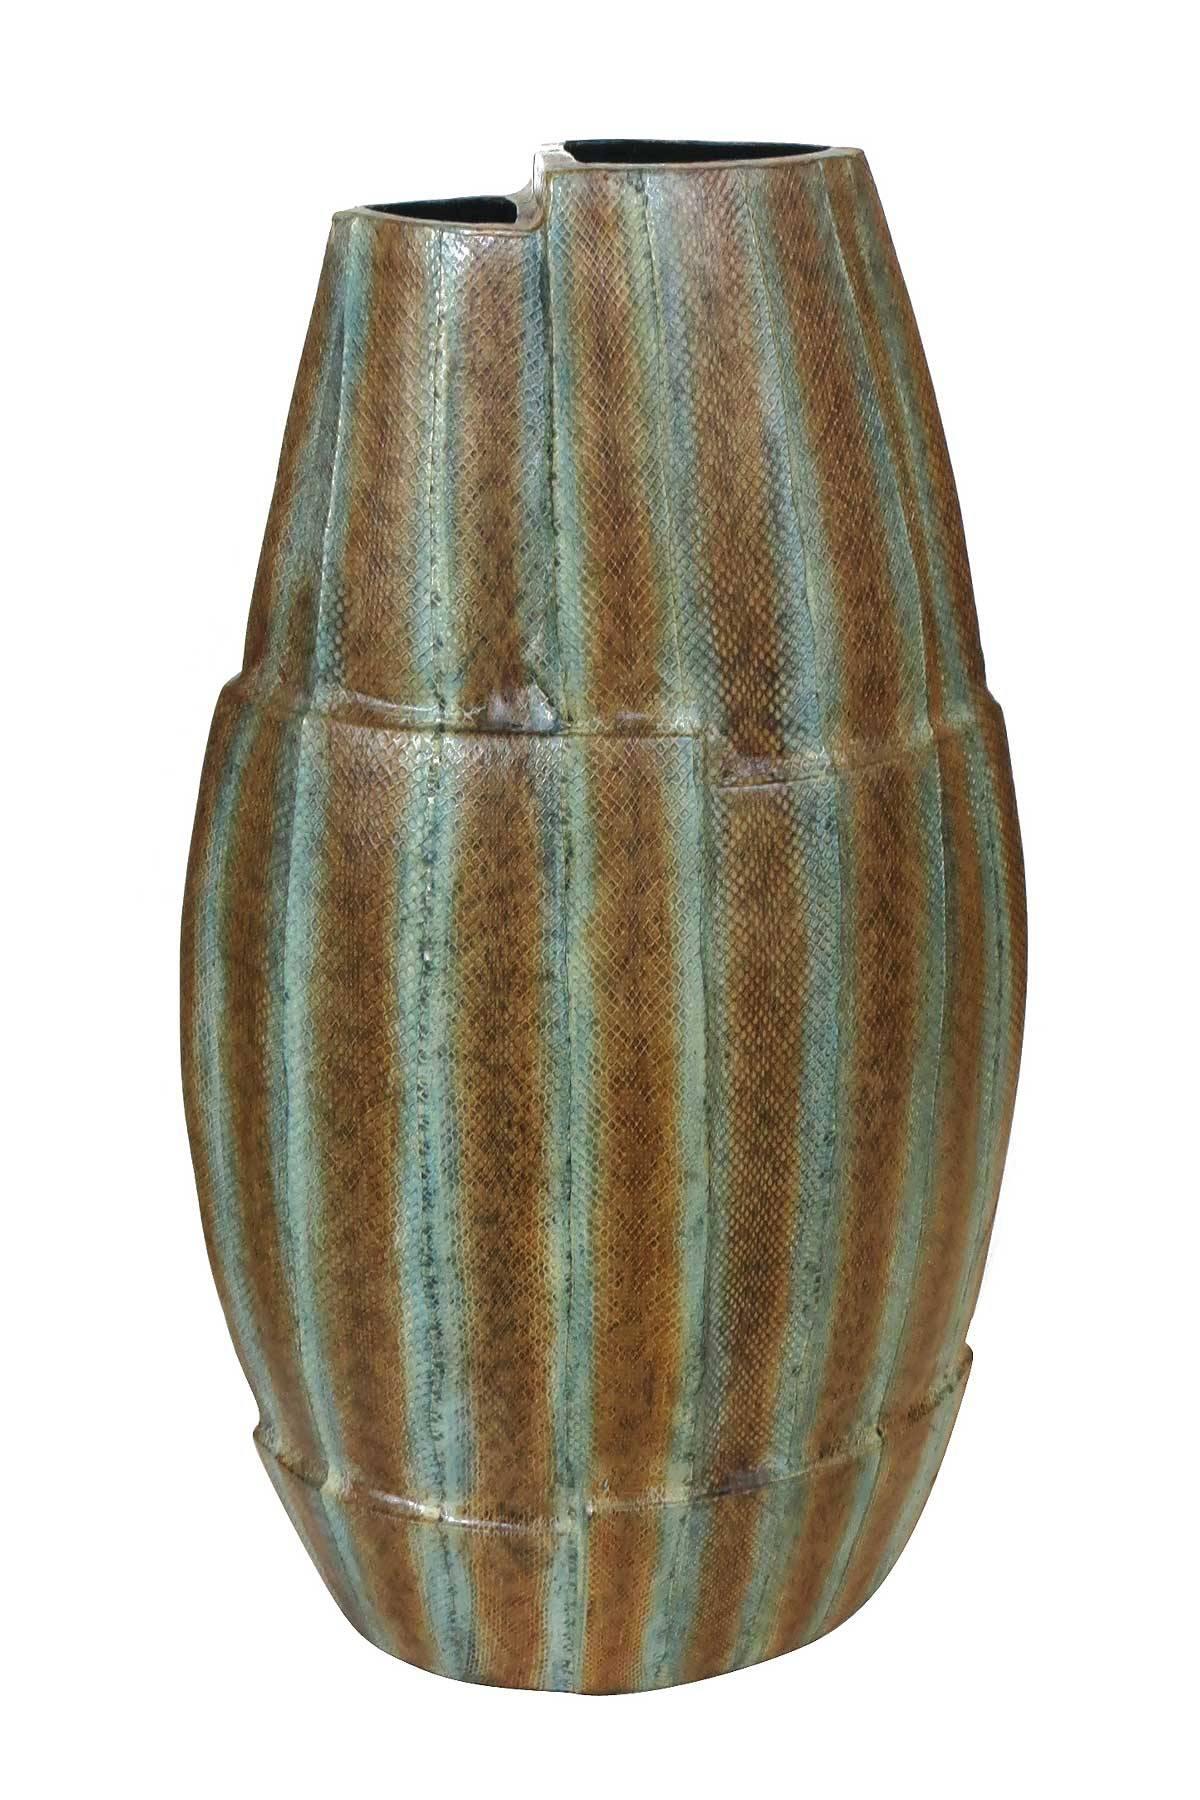 Asymmetrical resin vase wrapped in a multicolored dyed snakeskin. The vase features a stepped two split level top and unique oval shape.